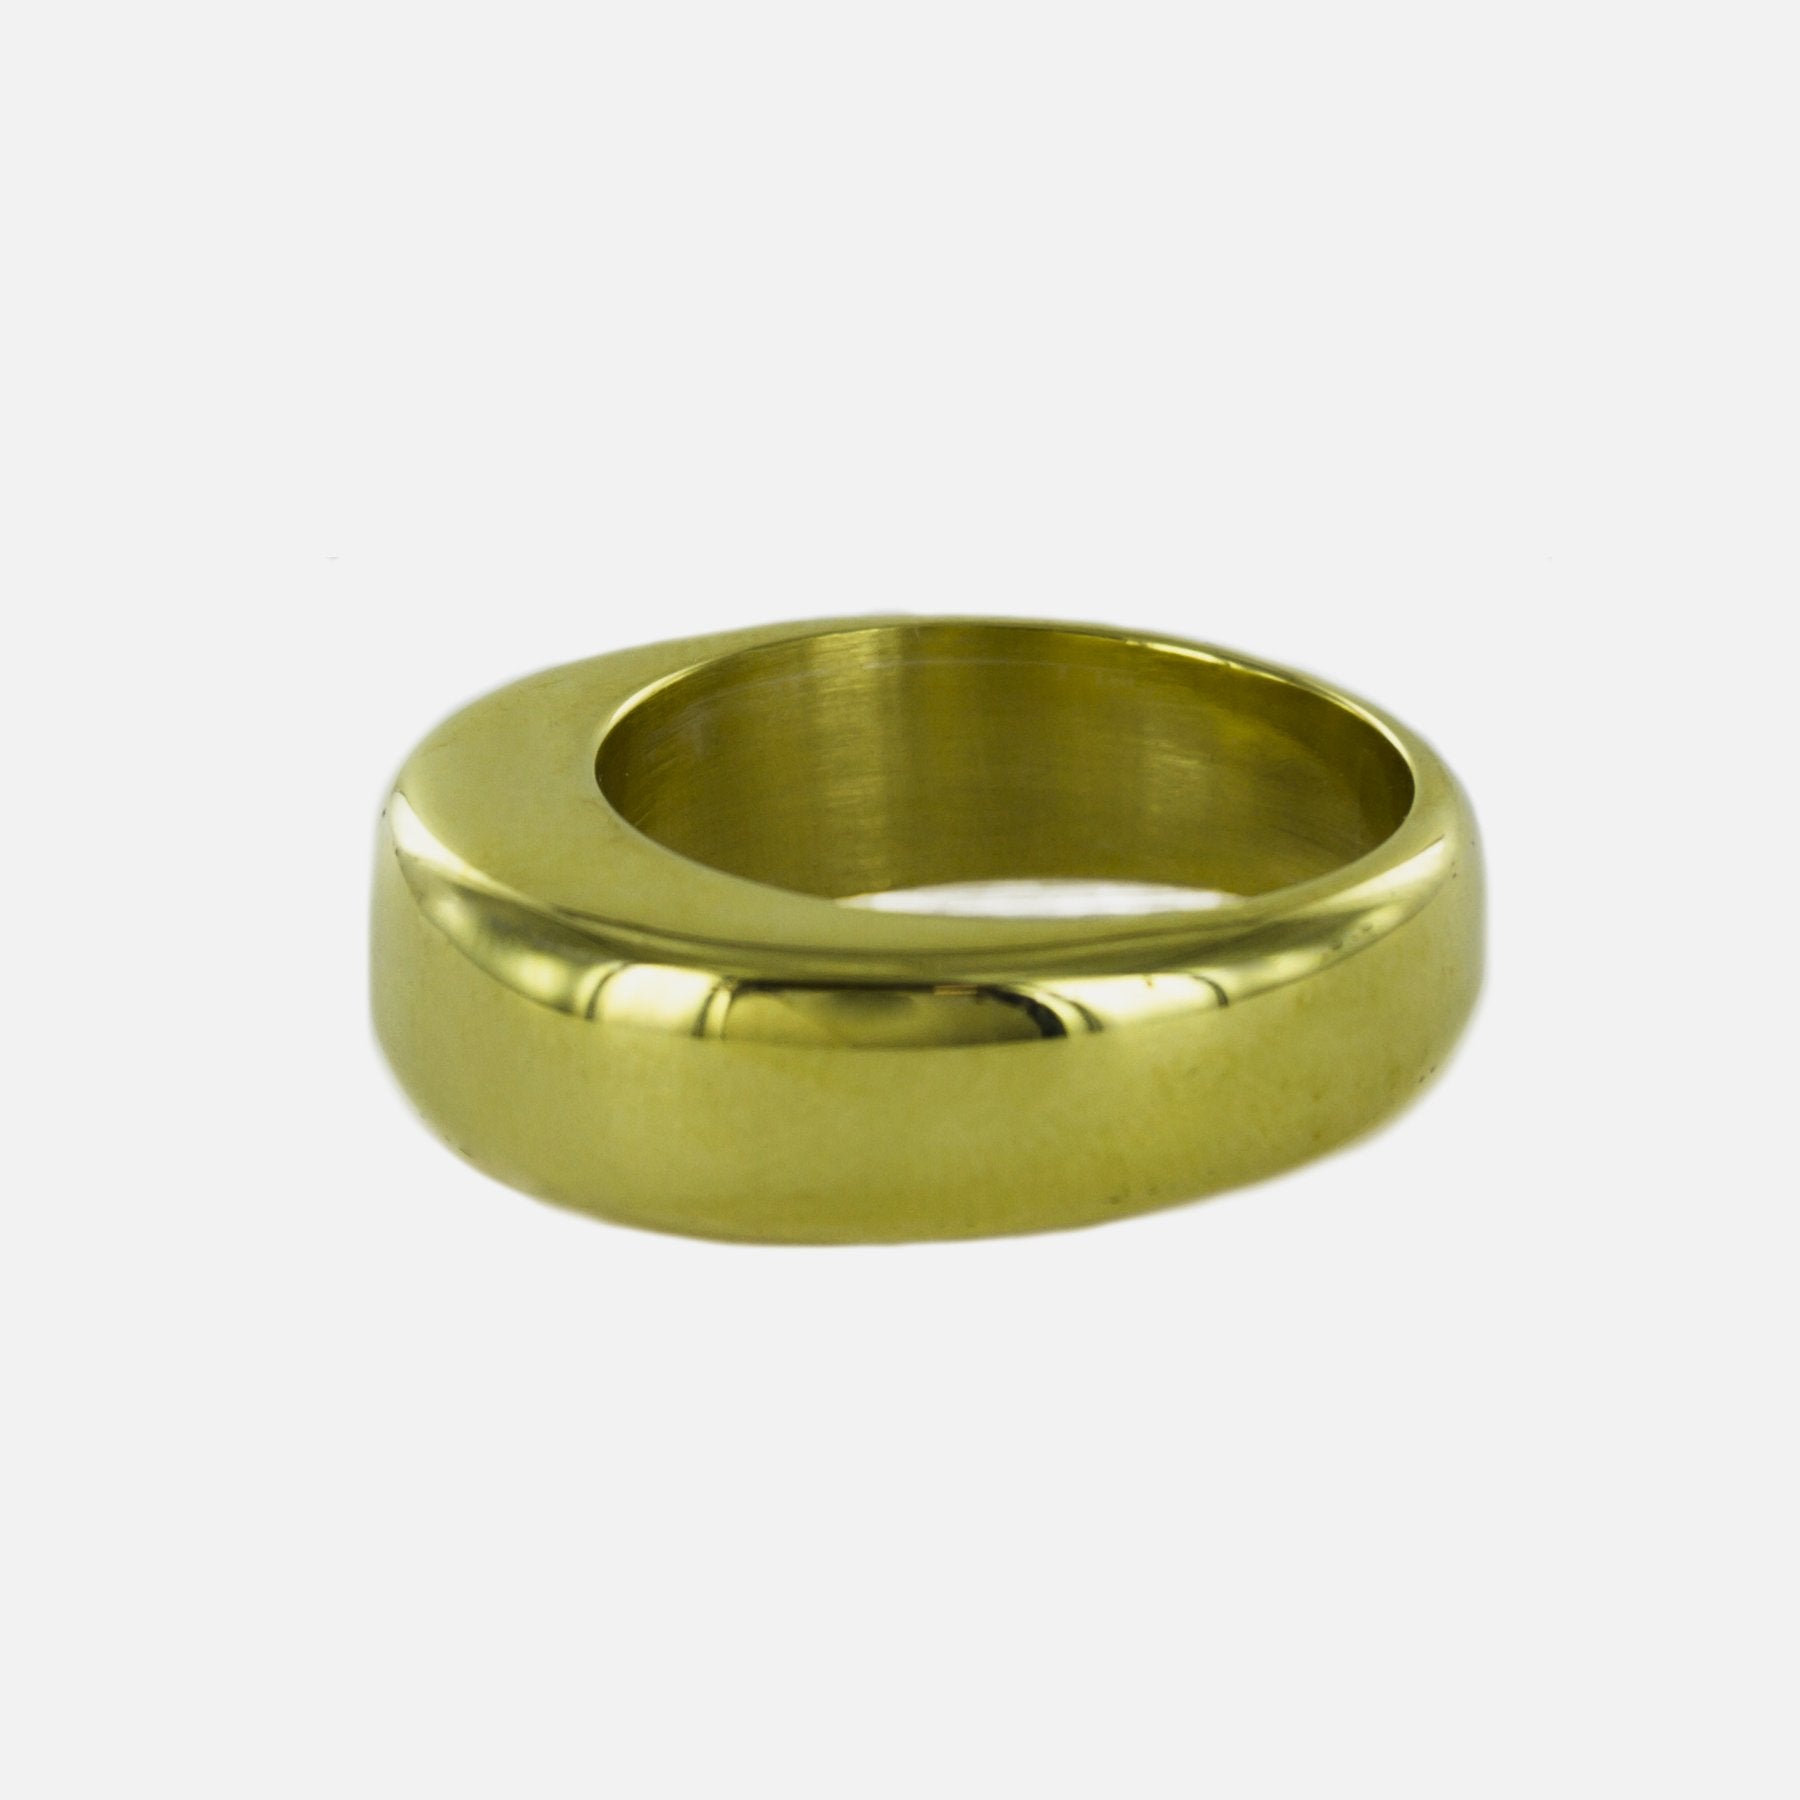 Hollow Brass Ring - Size 8